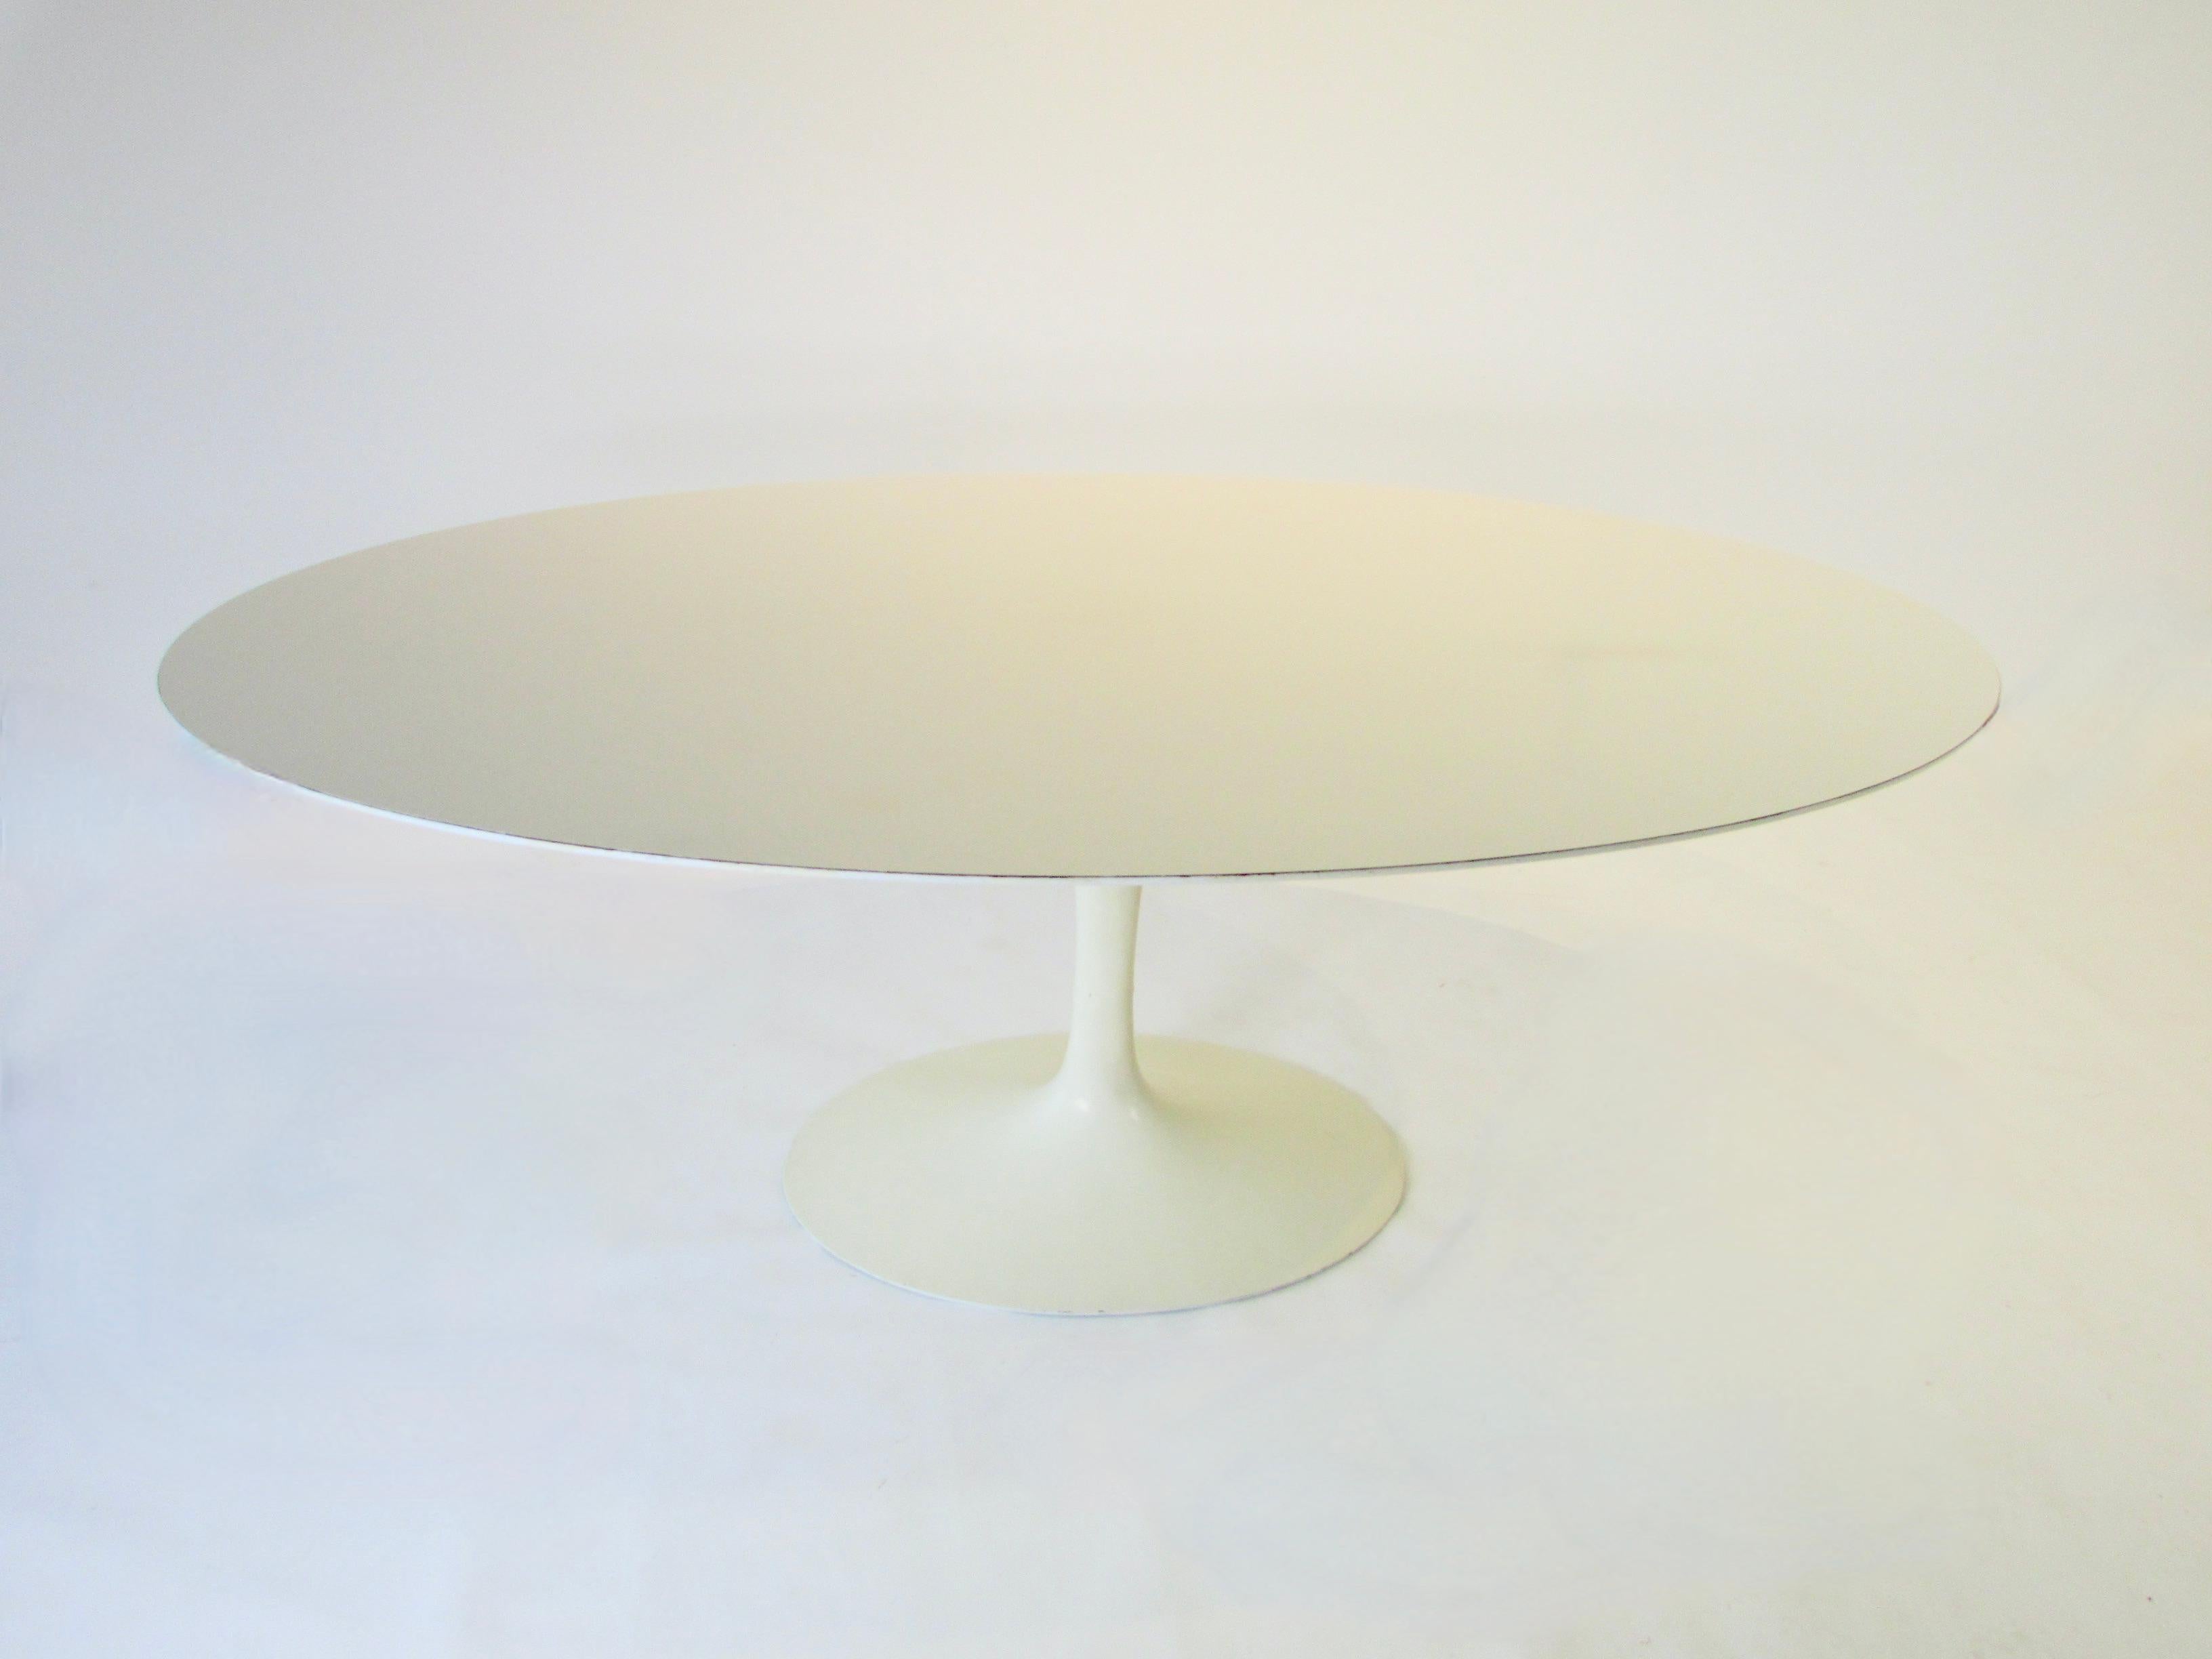 American Eero Saarinen for Knoll Oval Top Tulip Dining Table Early Cast Iron Base